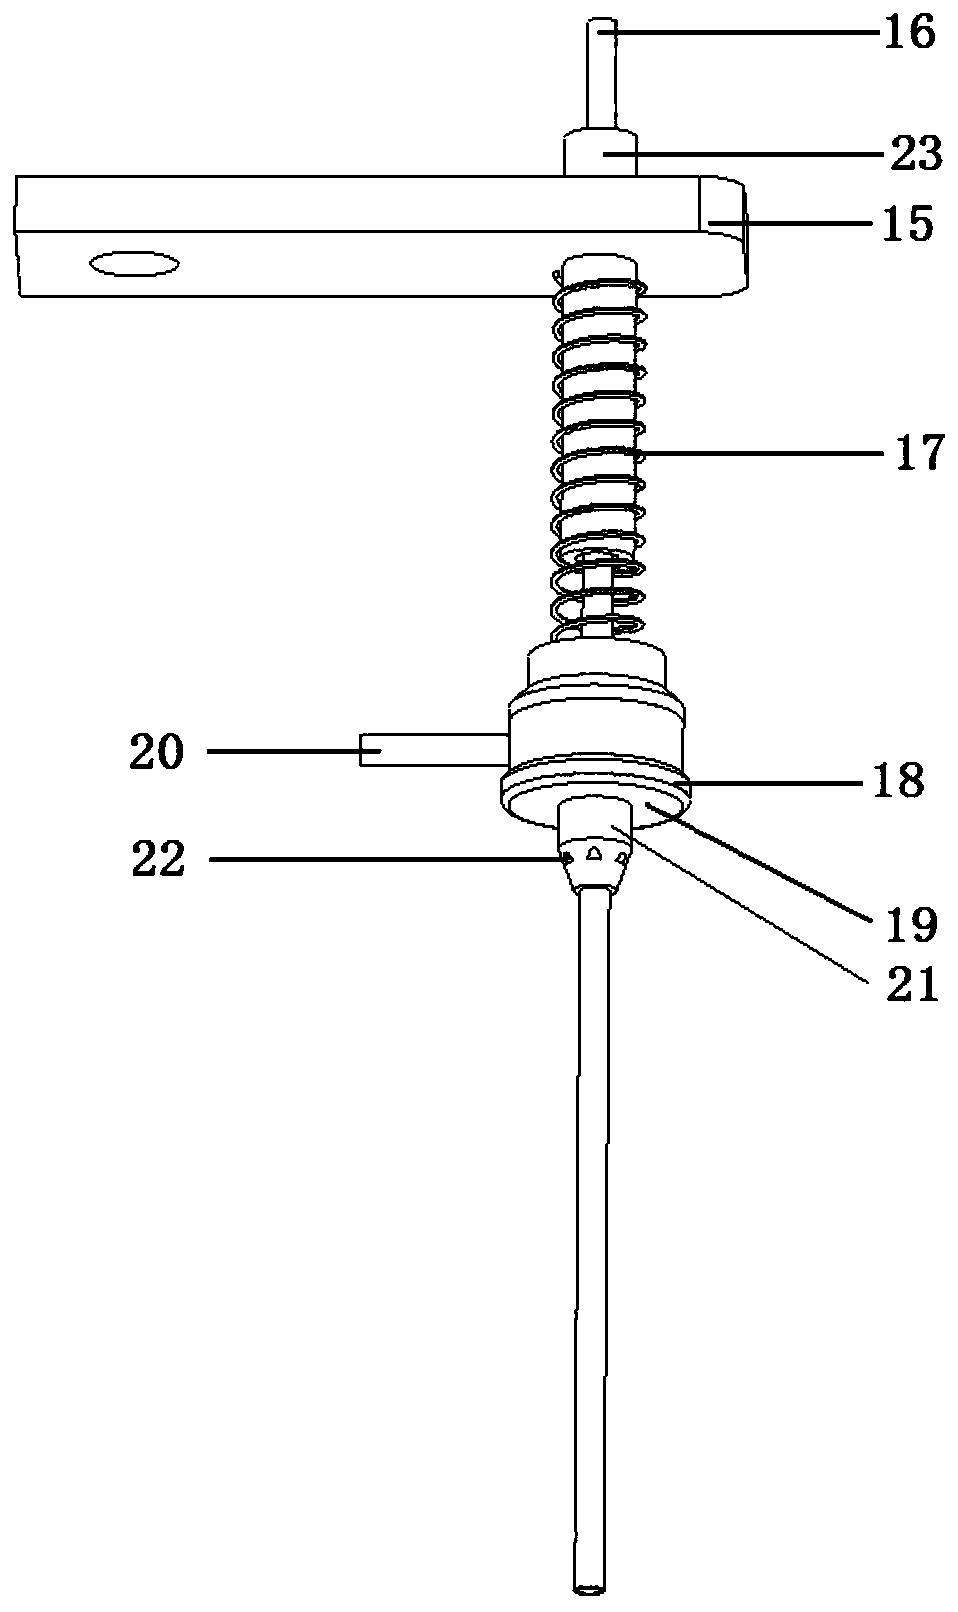 Ampoule bottle washing, wetting, filling and sealing integrated device